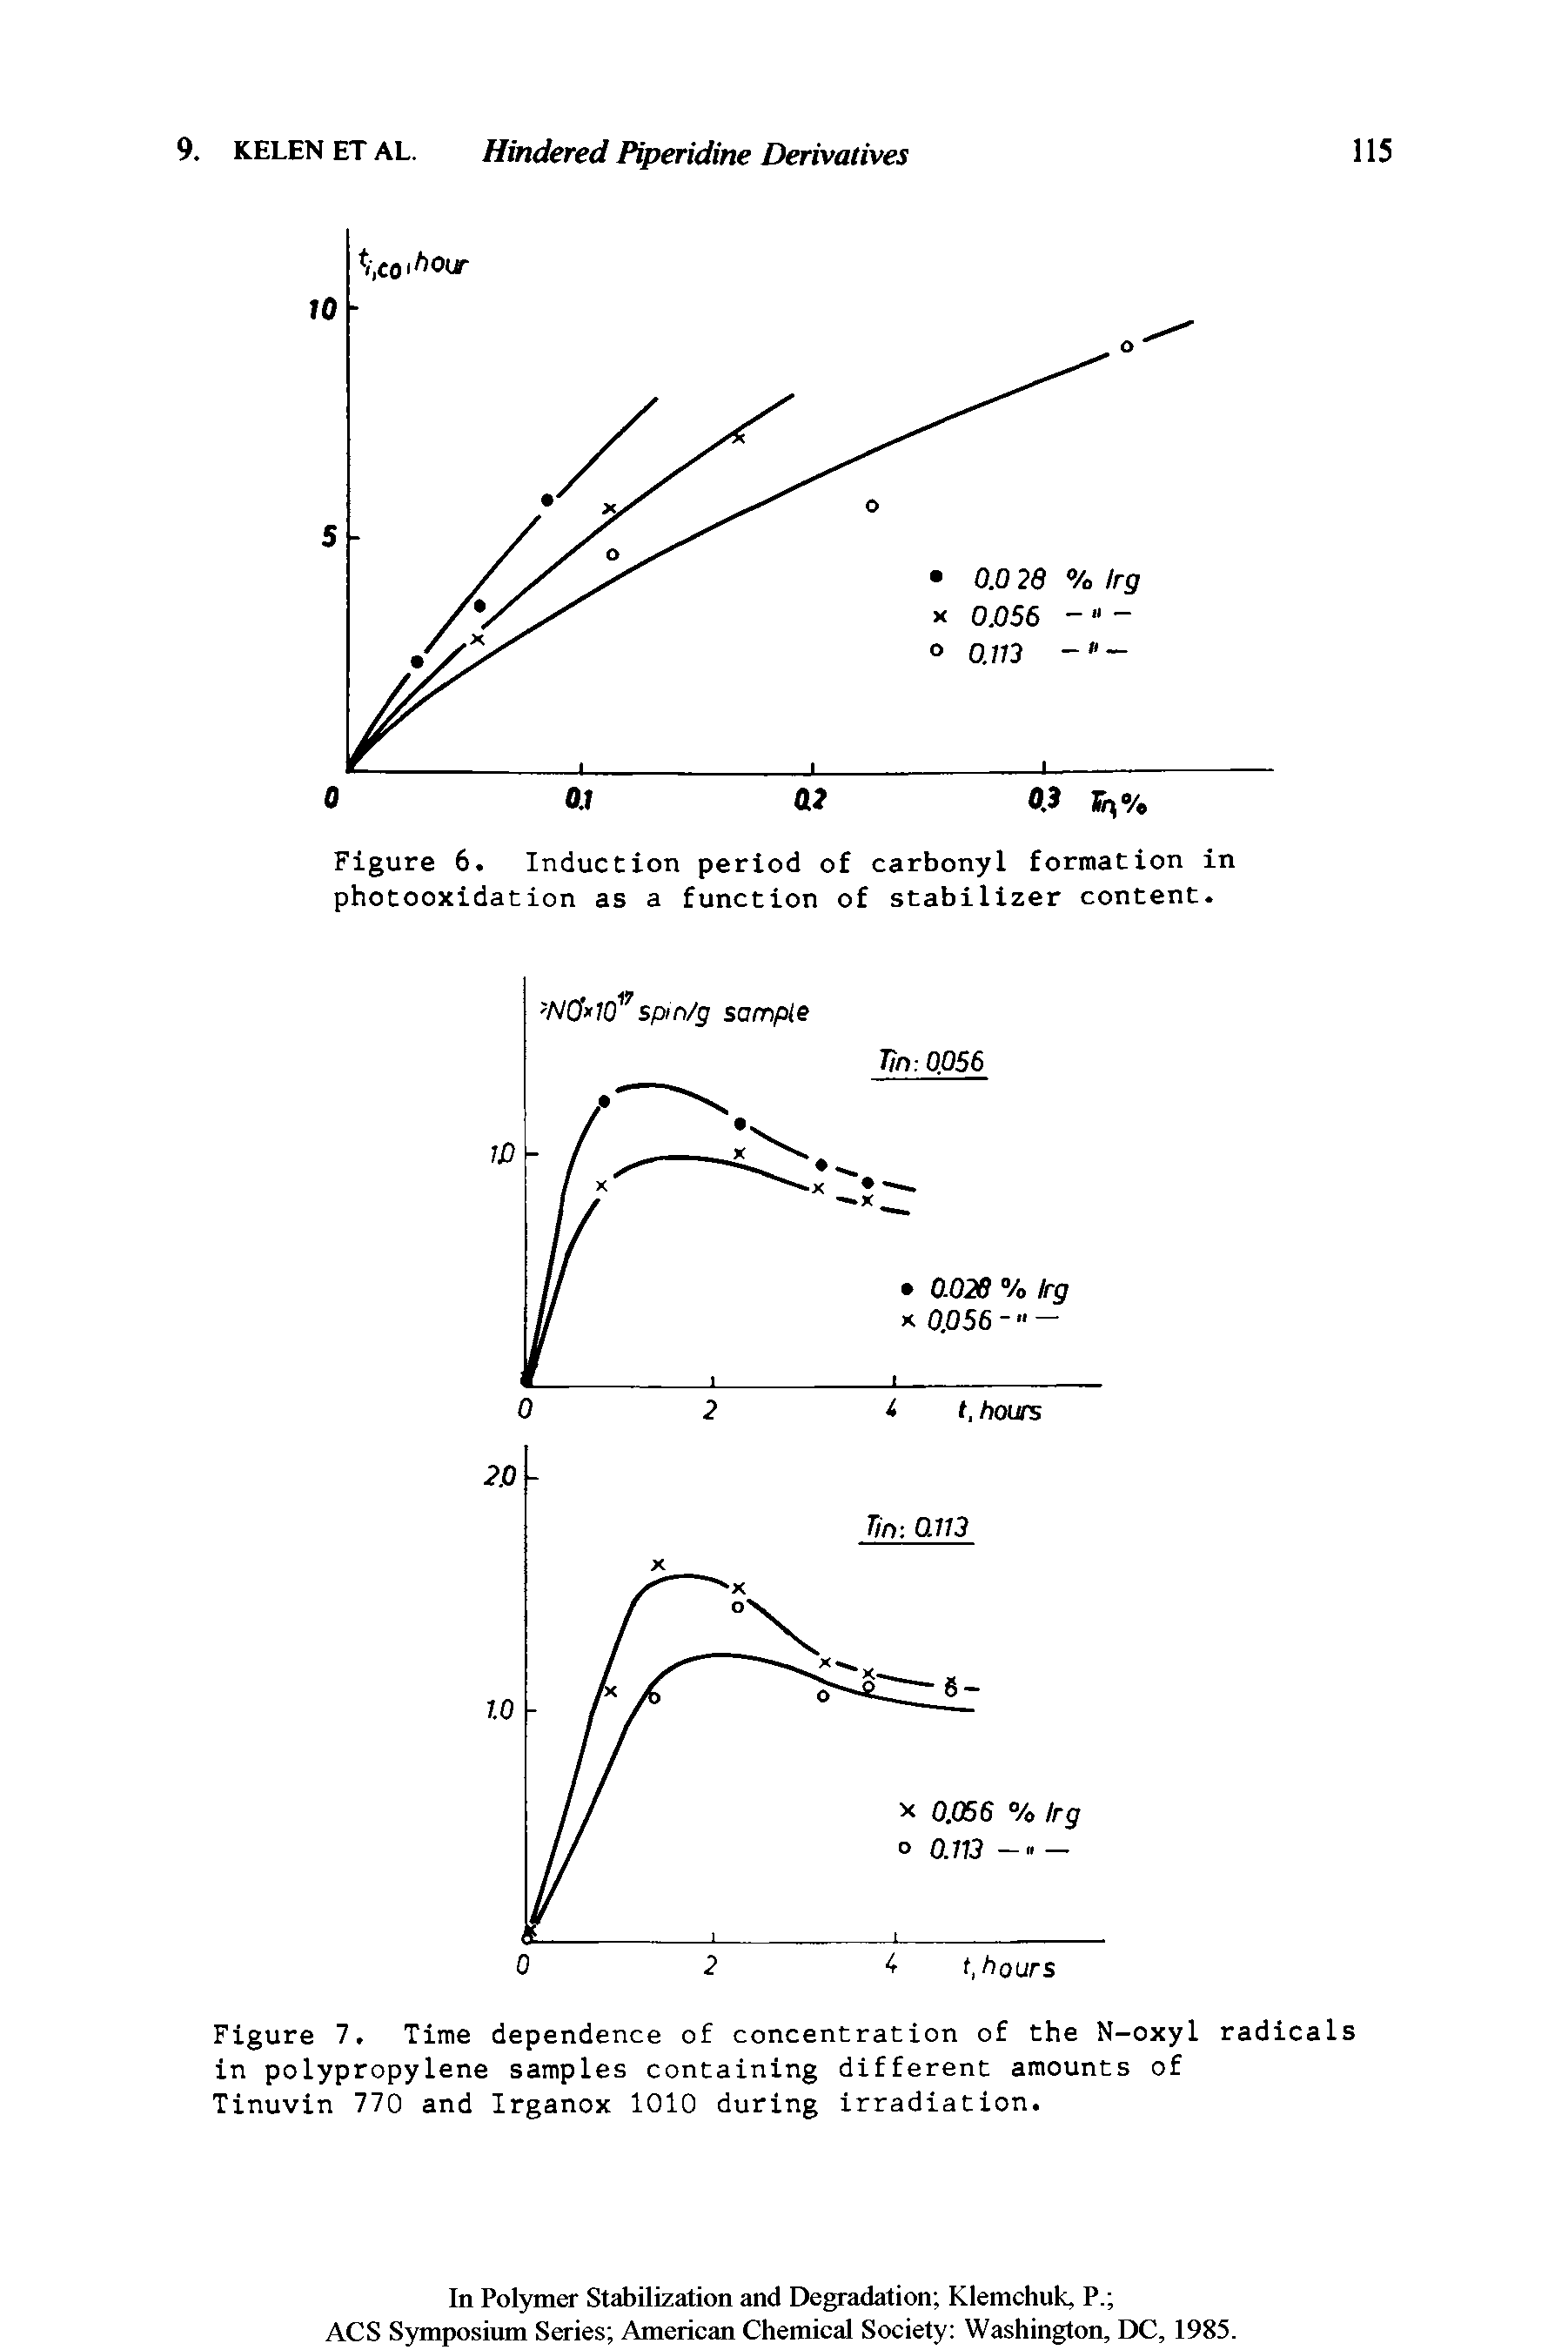 Figure 7. Time dependence of concentration of the N-oxyl radicals in polypropylene samples containing different amounts of Tinuvin 770 and Irganox 1010 during irradiation.